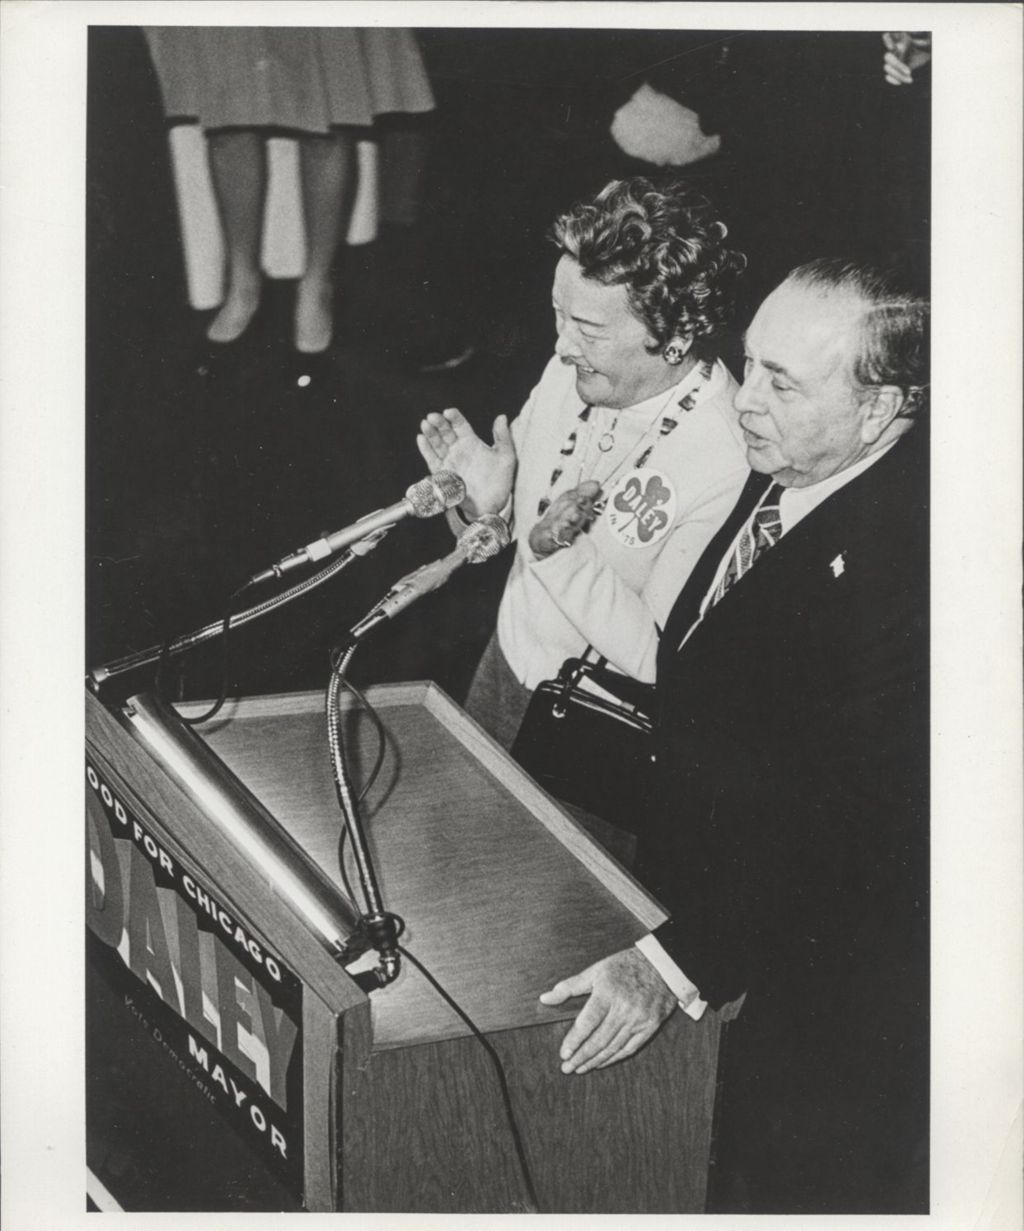 Miniature of Eleanor and Richard J. Daley at a podium on election night